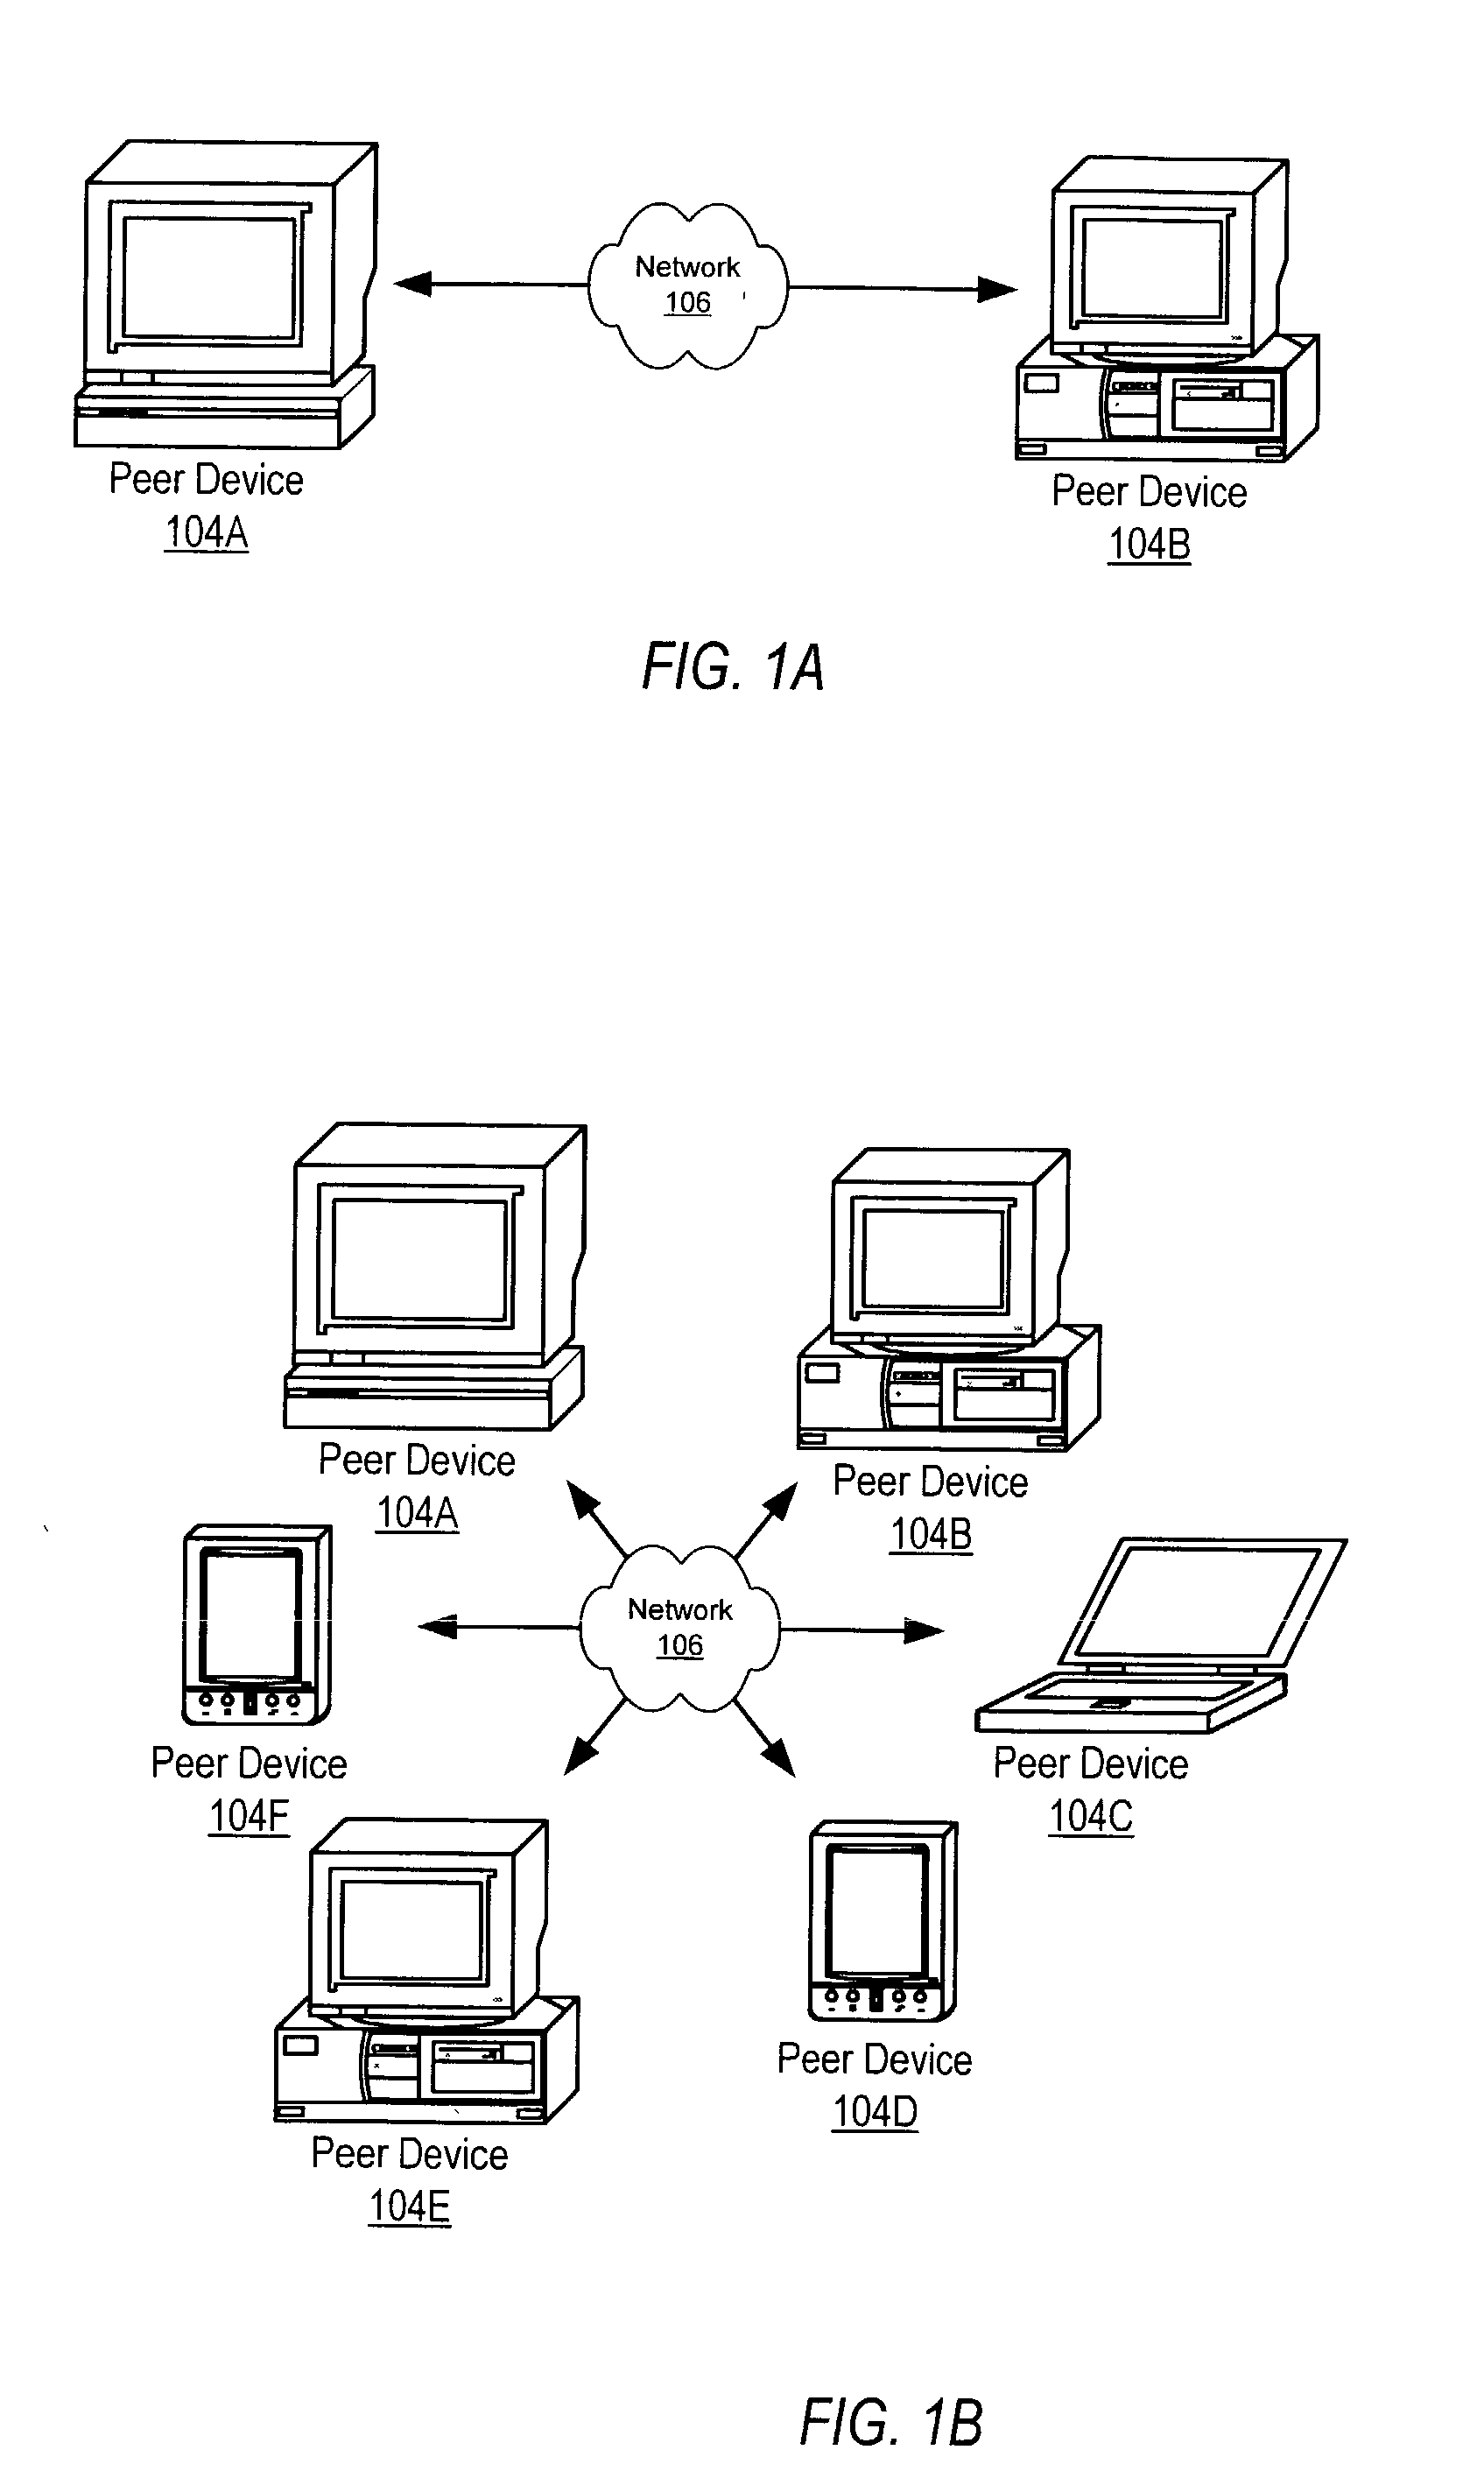 System and method for submitting and performing computational tasks in a distributed heterogeneous networked environment